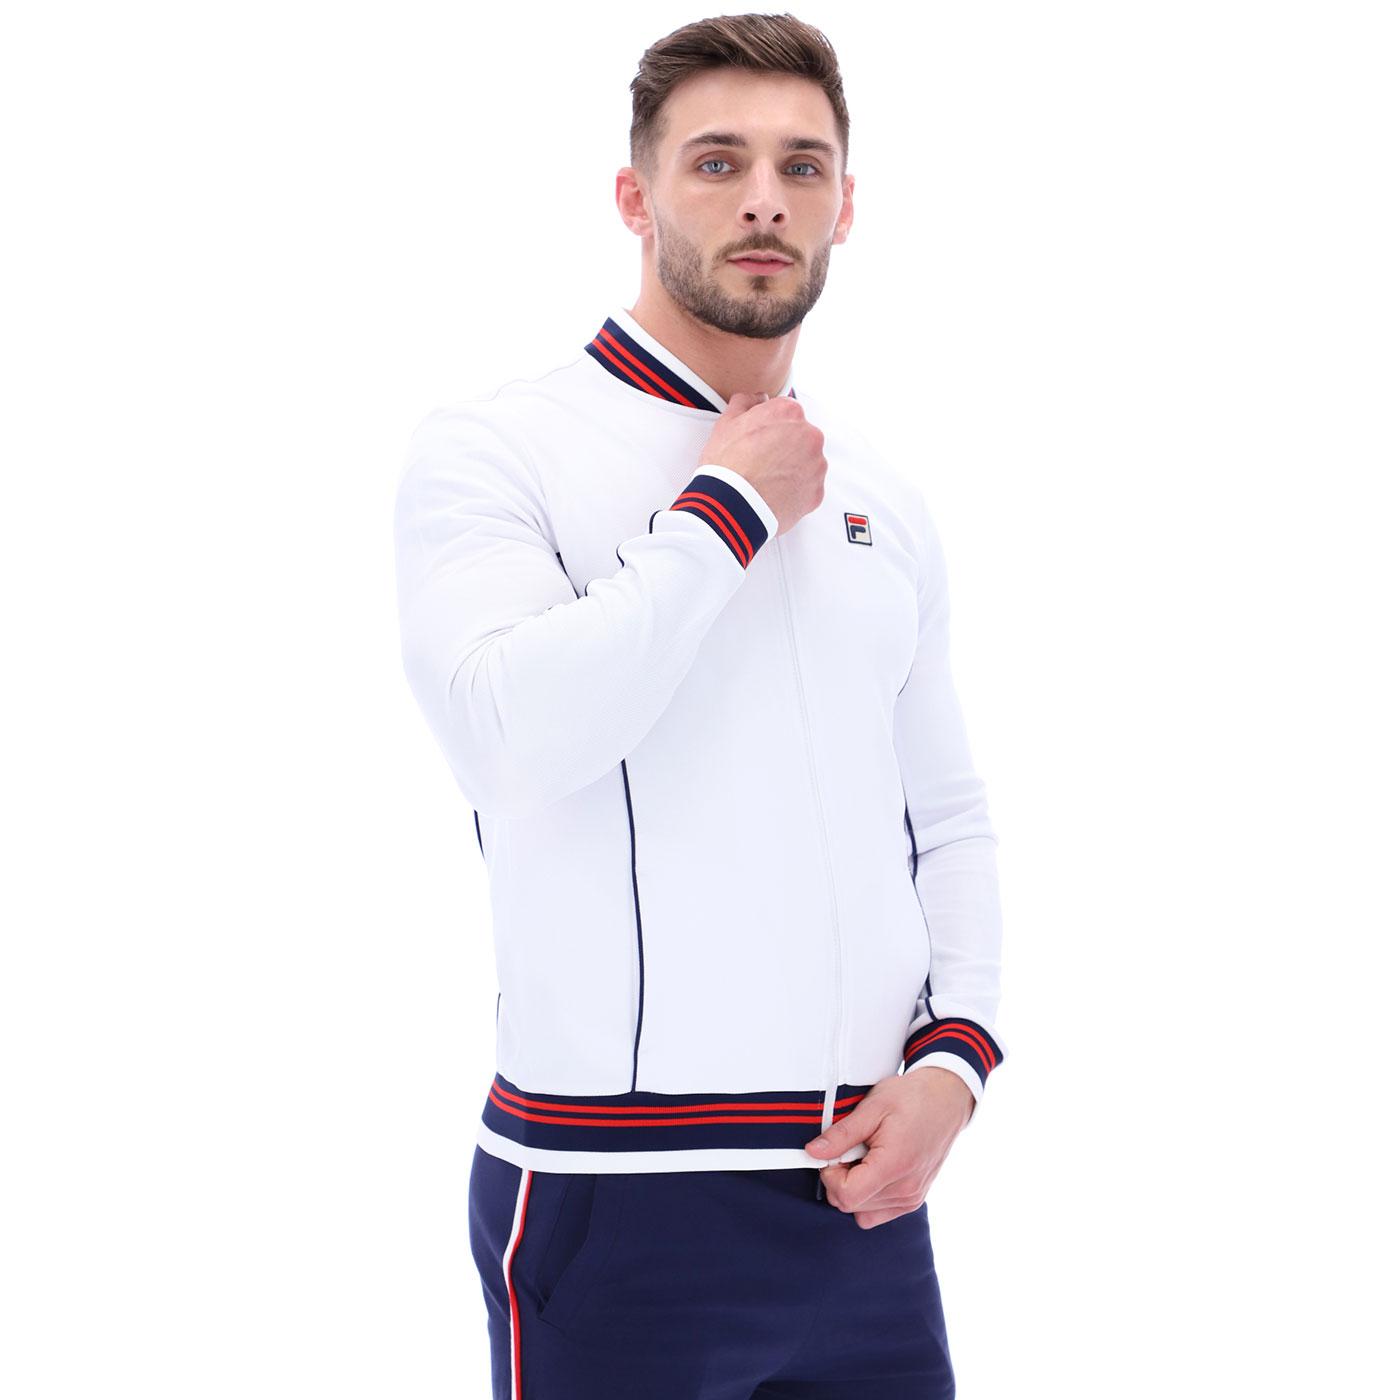 FILA VINTAGE Baranci Retro Tipped England Track Top in White